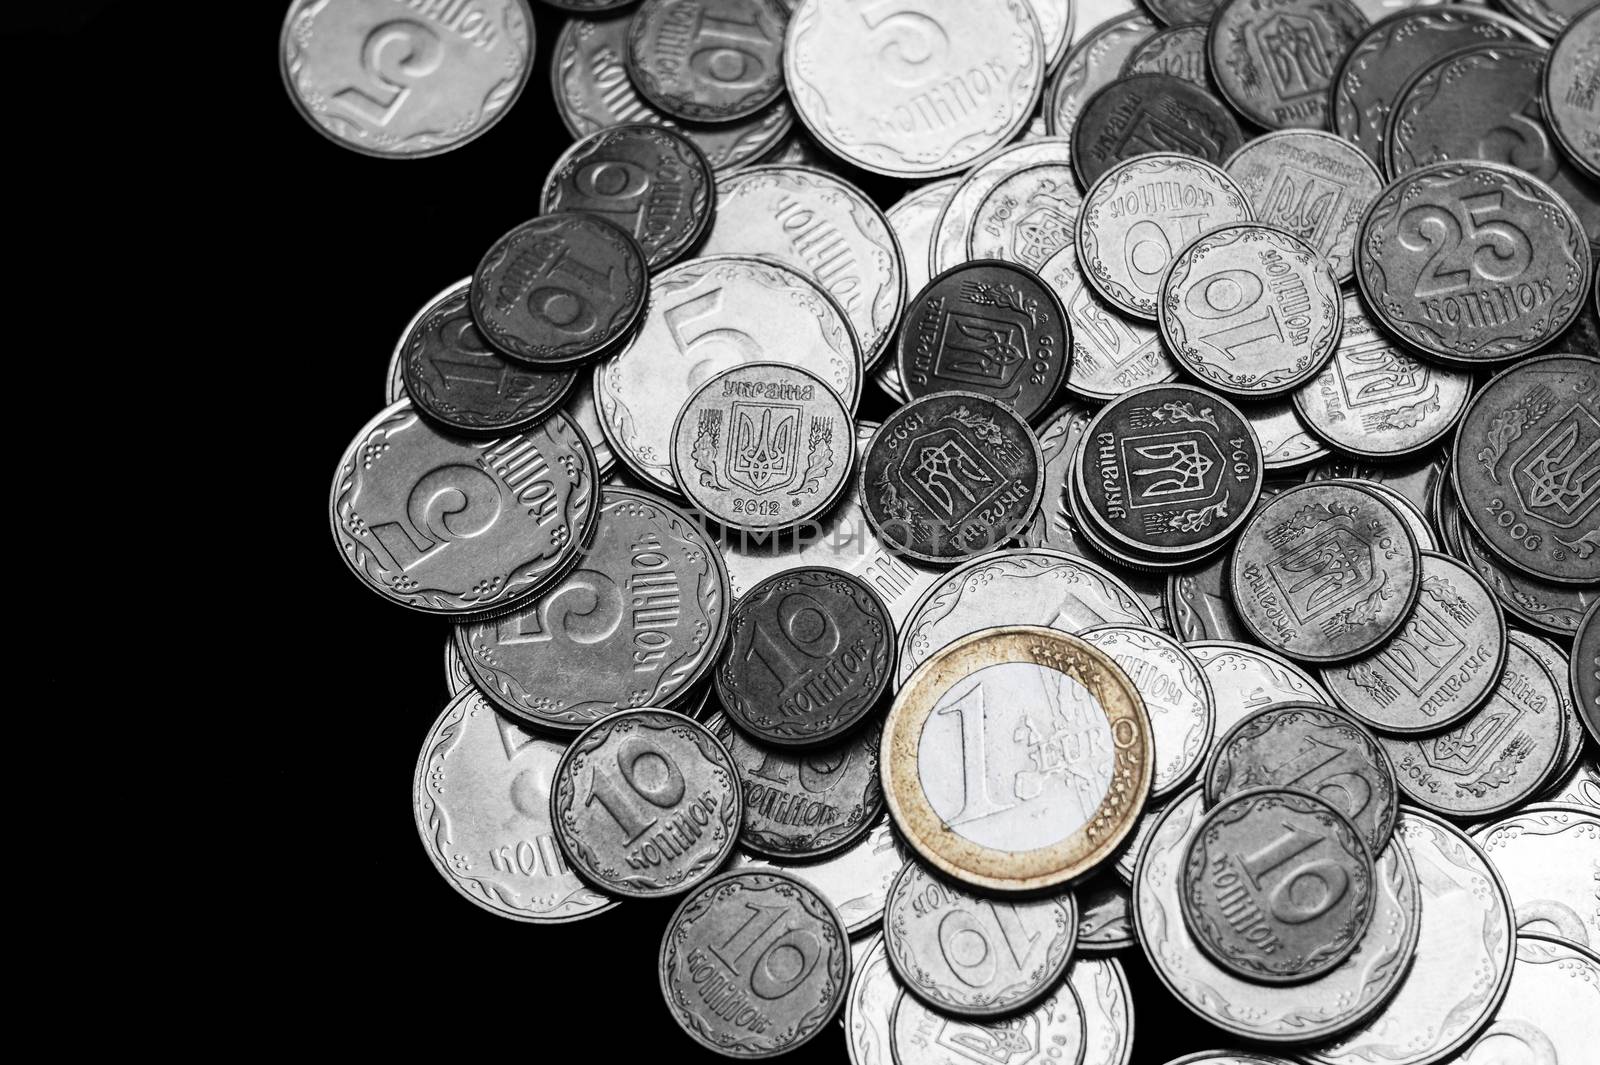 Ukrainian coins with one euro coin isolated on black background. Black and white image.  Euro coin is colored. Close-up view. Coins are located at the right side of frame. A conceptual image. by alexsdriver